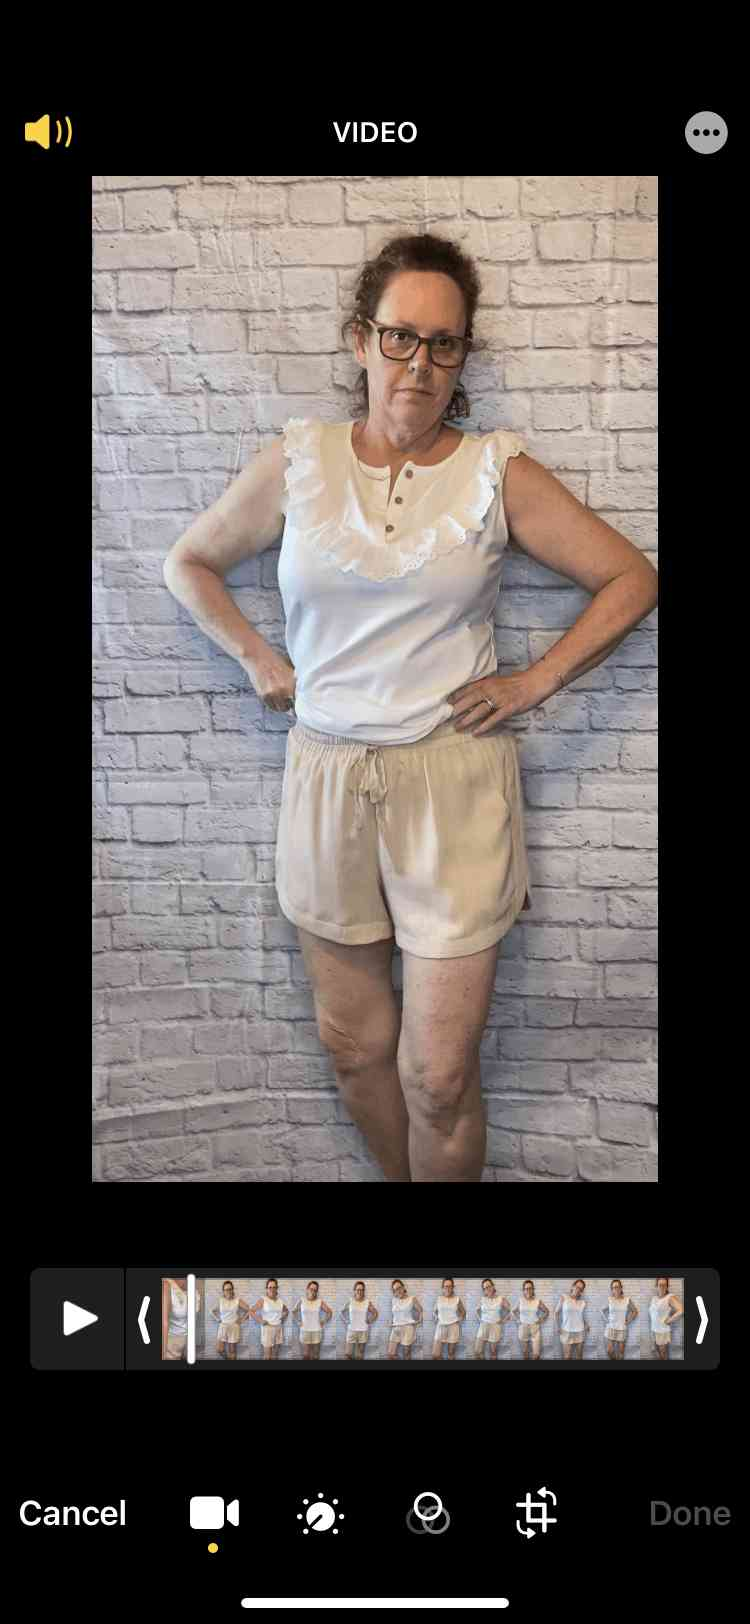 Taupe Shorts - The Swanky Bee